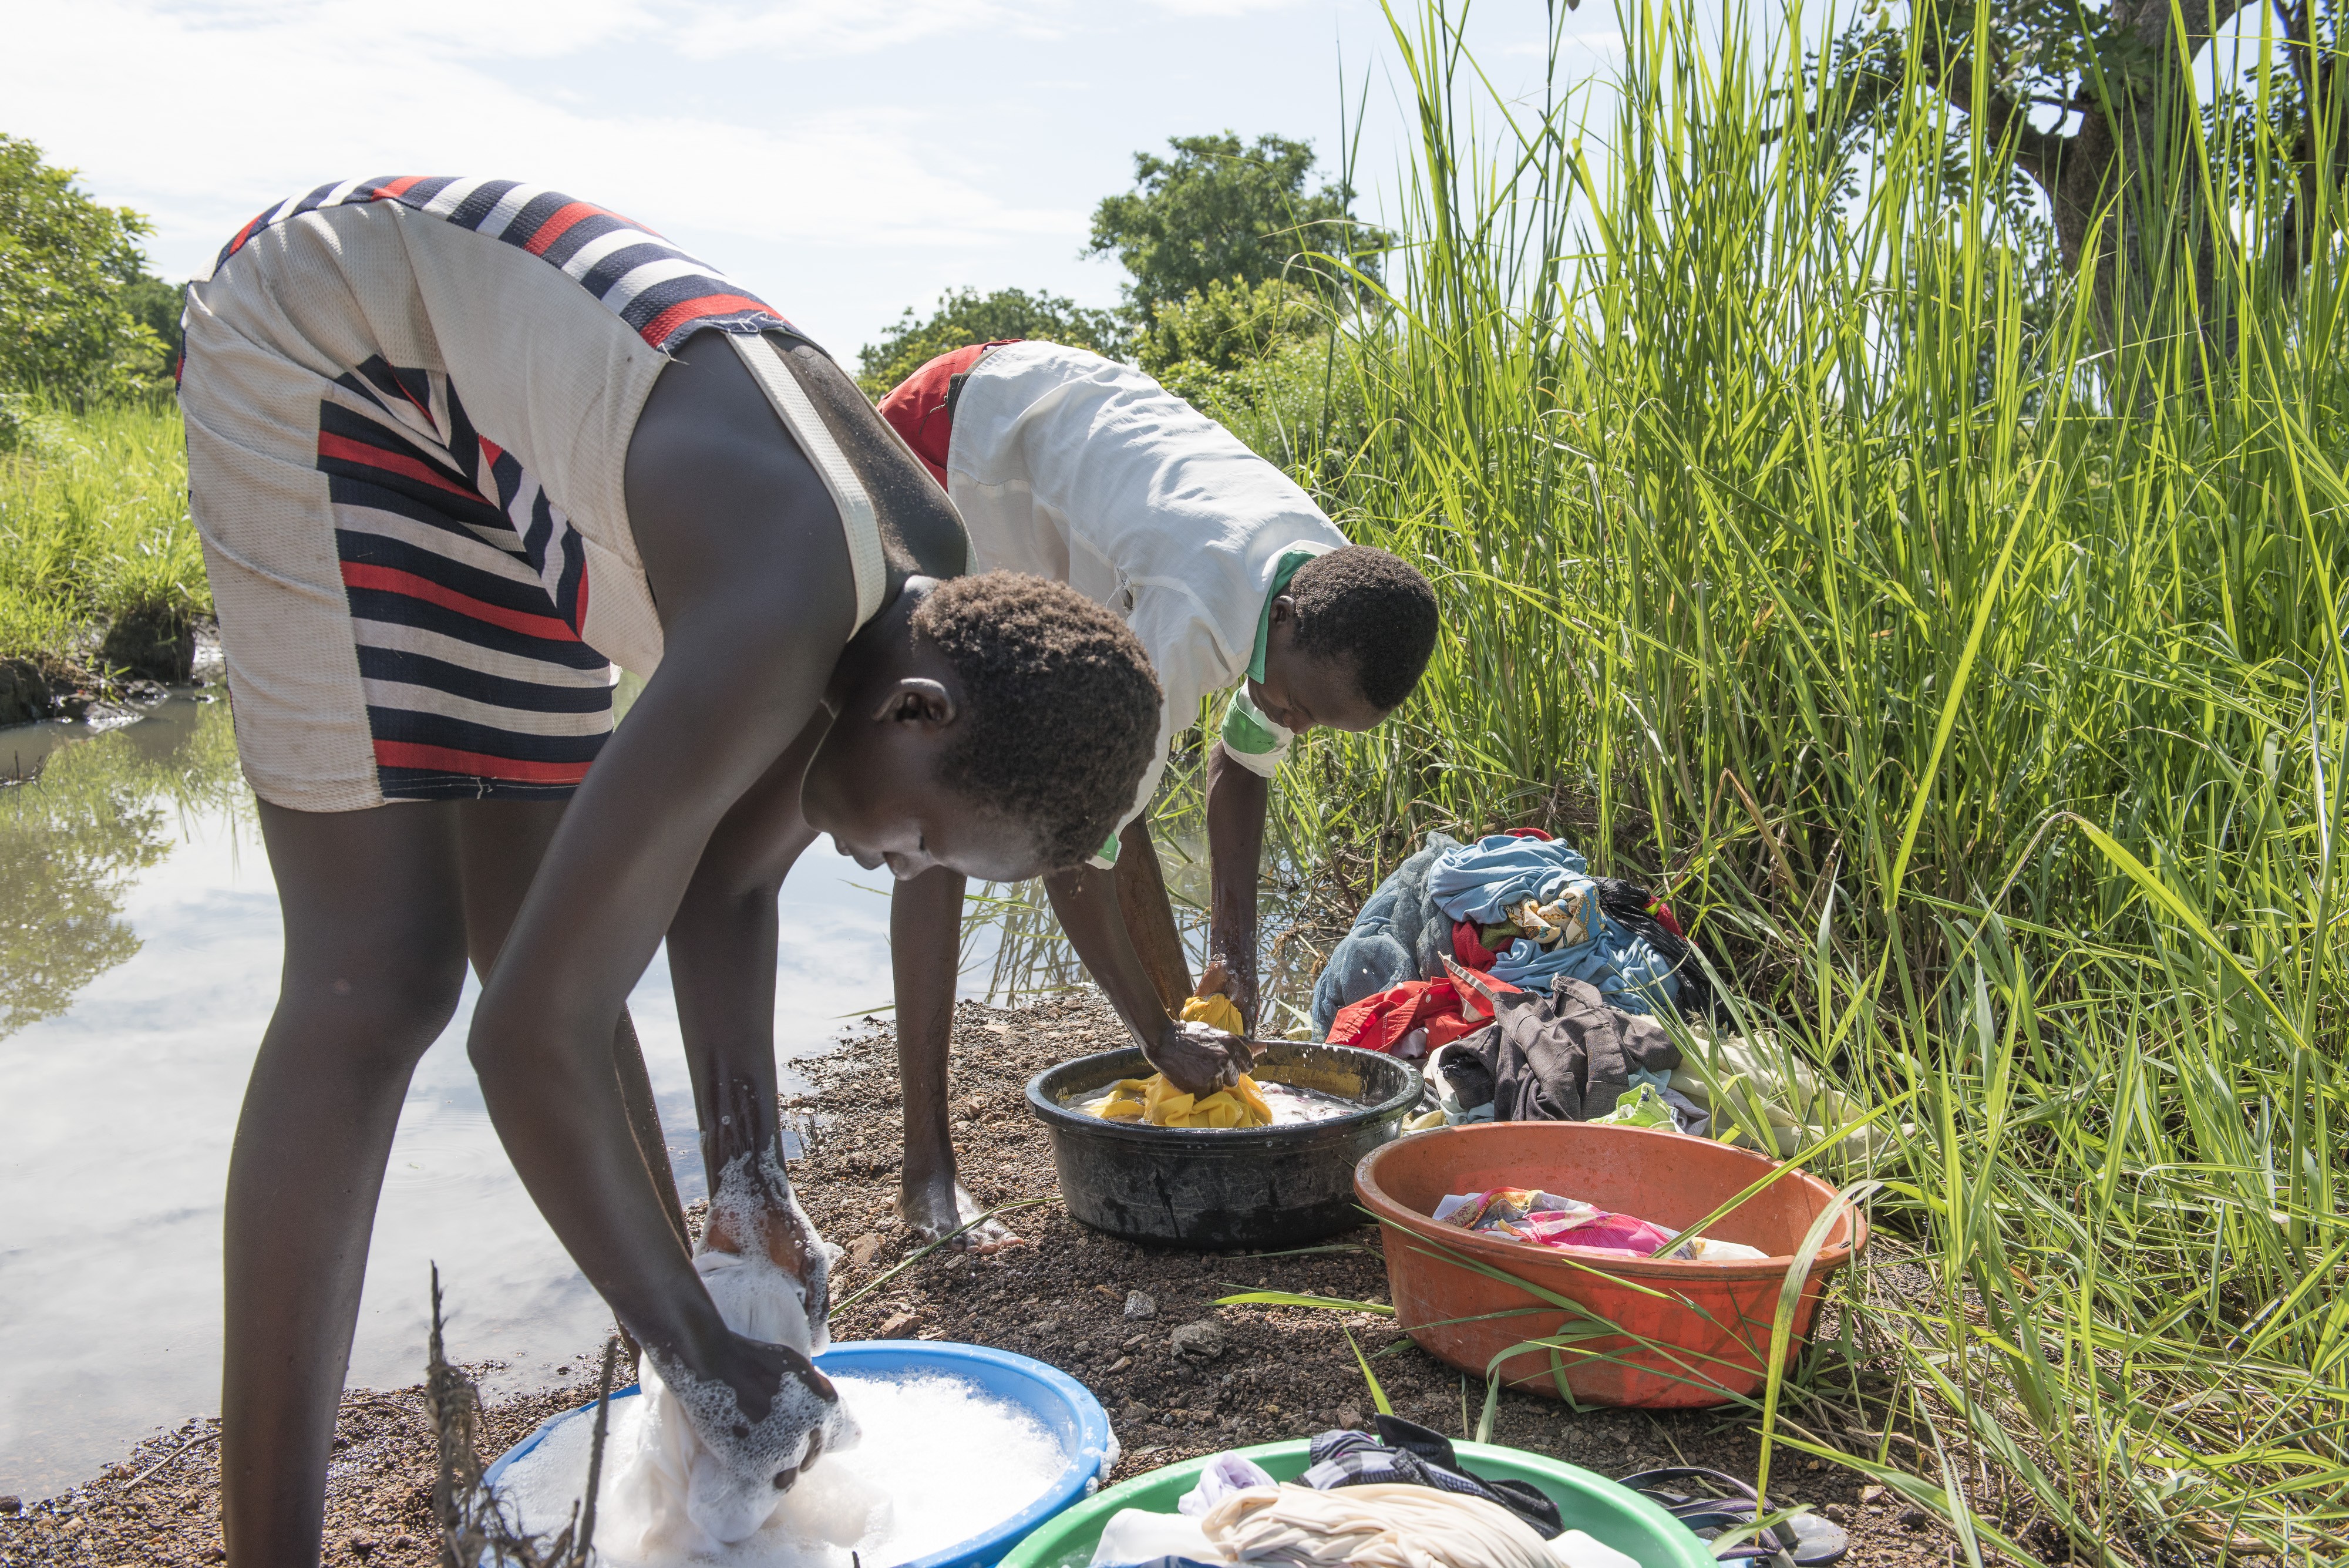 Girls wash clothes next to the river in South Sudan